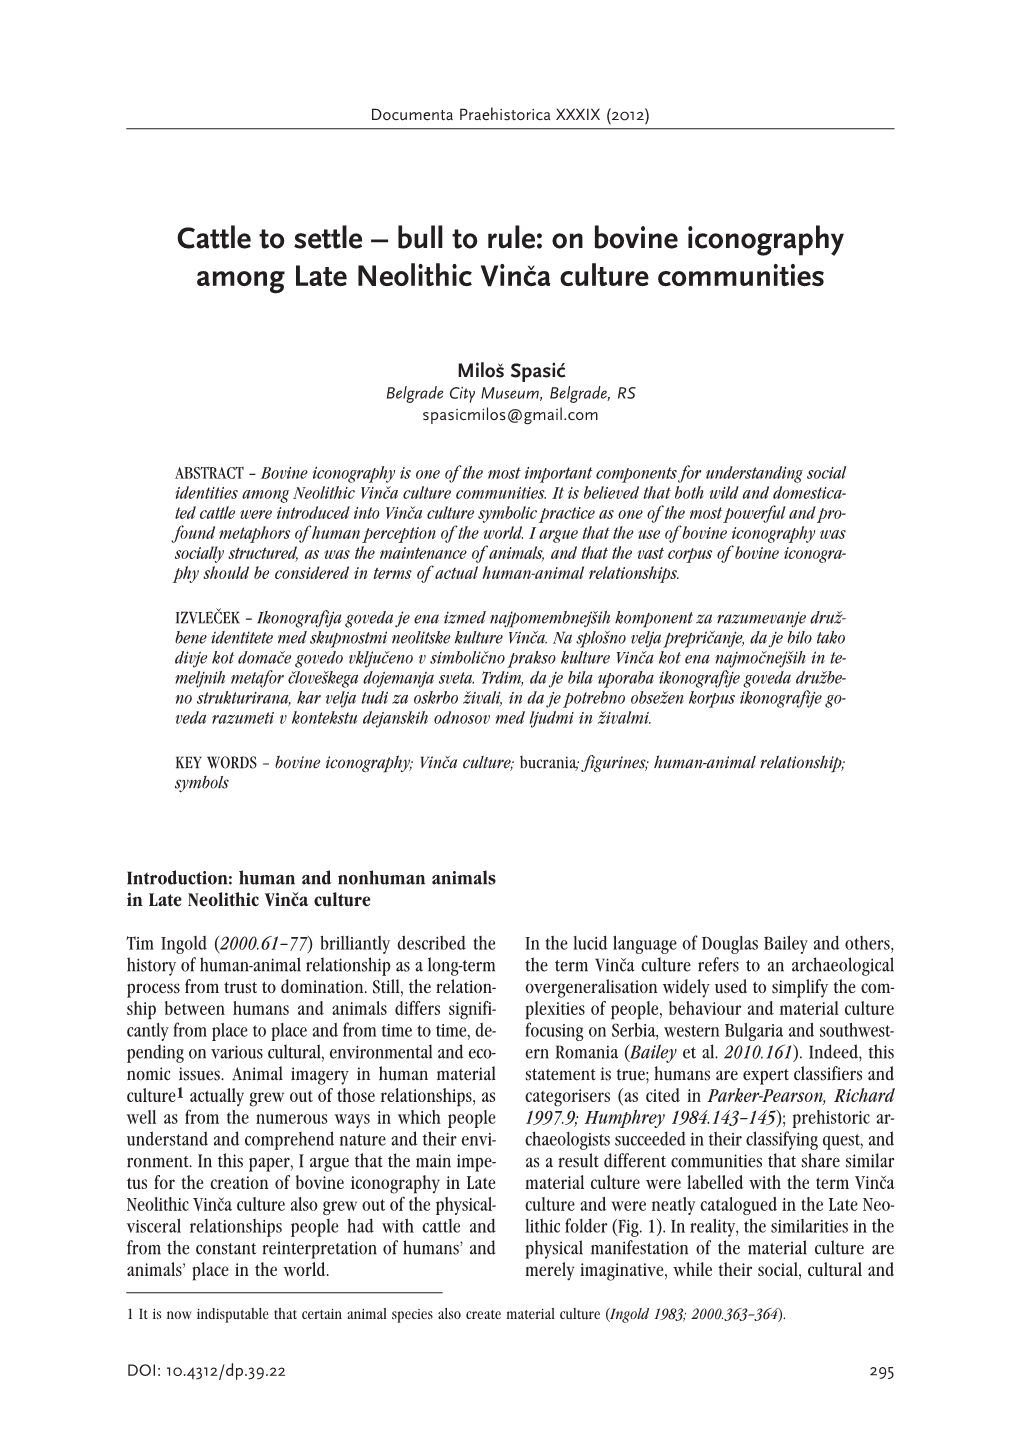 Bull to Rule&gt; on Bovine Iconography Among Late Neolithic